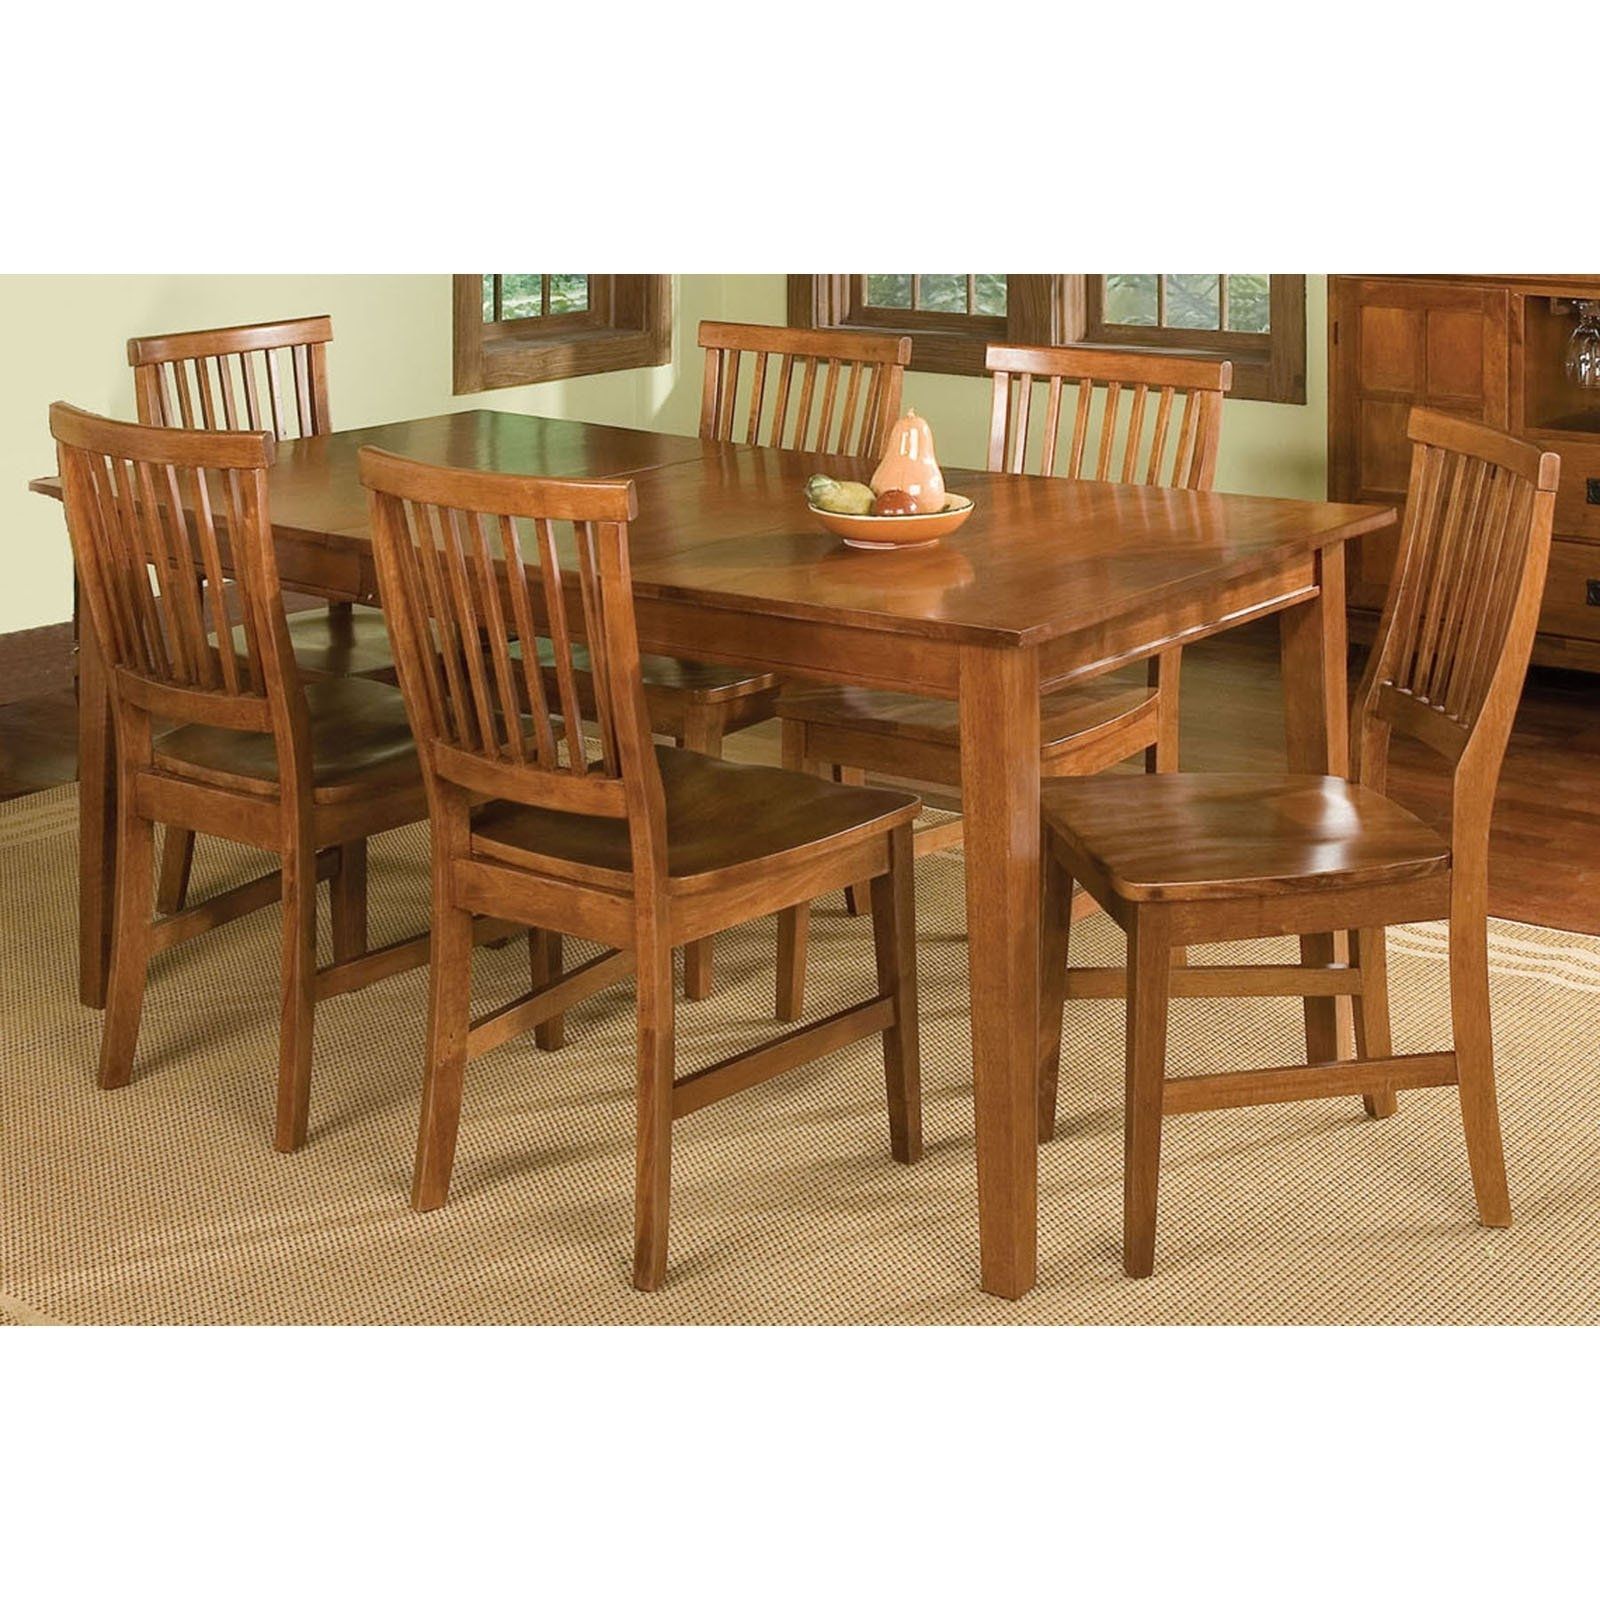 Home Styles Arts & Crafts 7 Piece Dining Set, Cottage Oak – Walmart Intended For Well Liked Oak Dining Tables And Chairs (View 8 of 25)